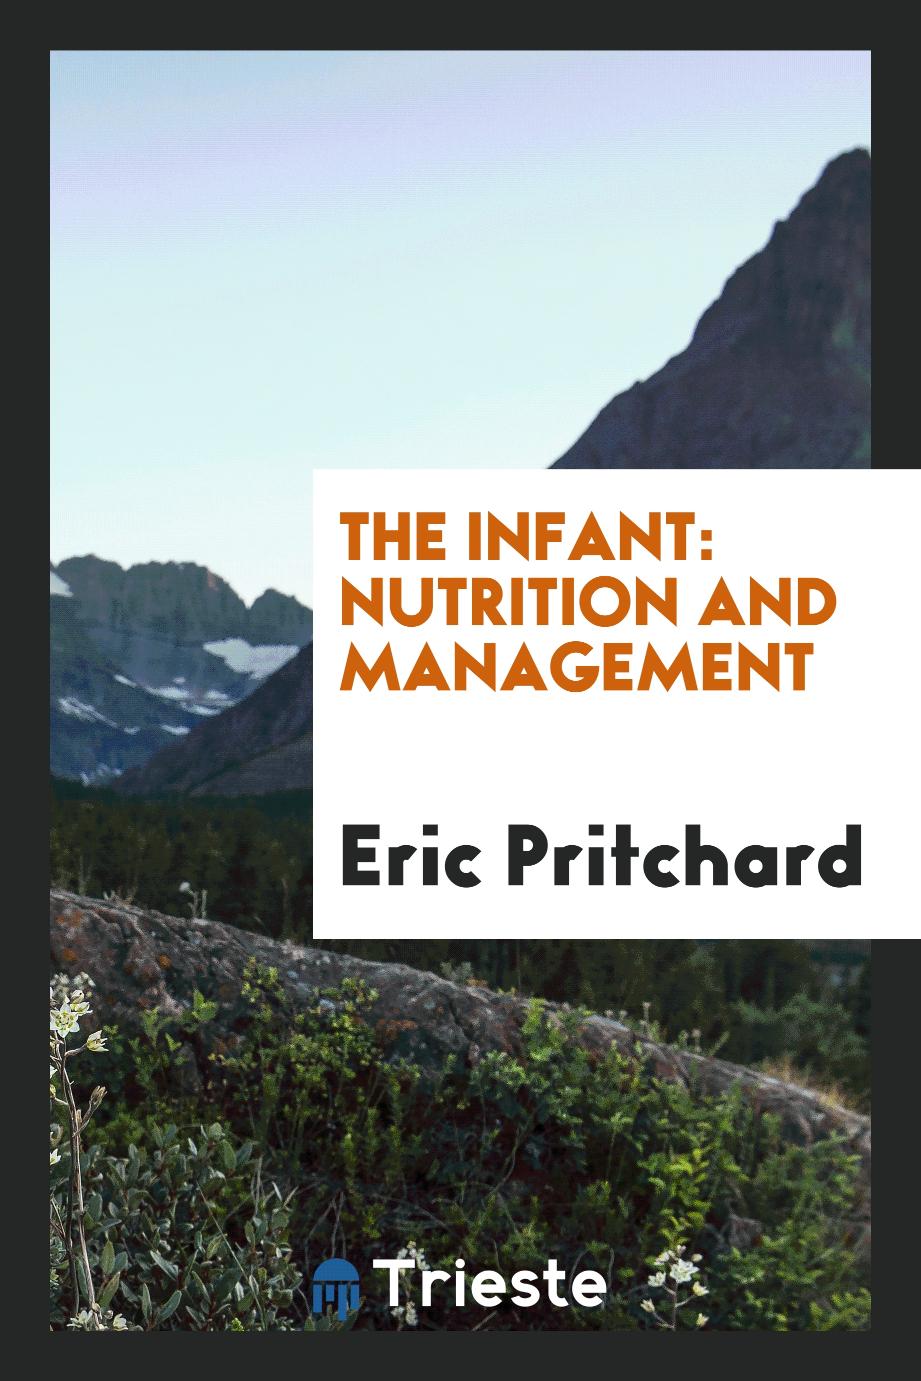 The infant: nutrition and management